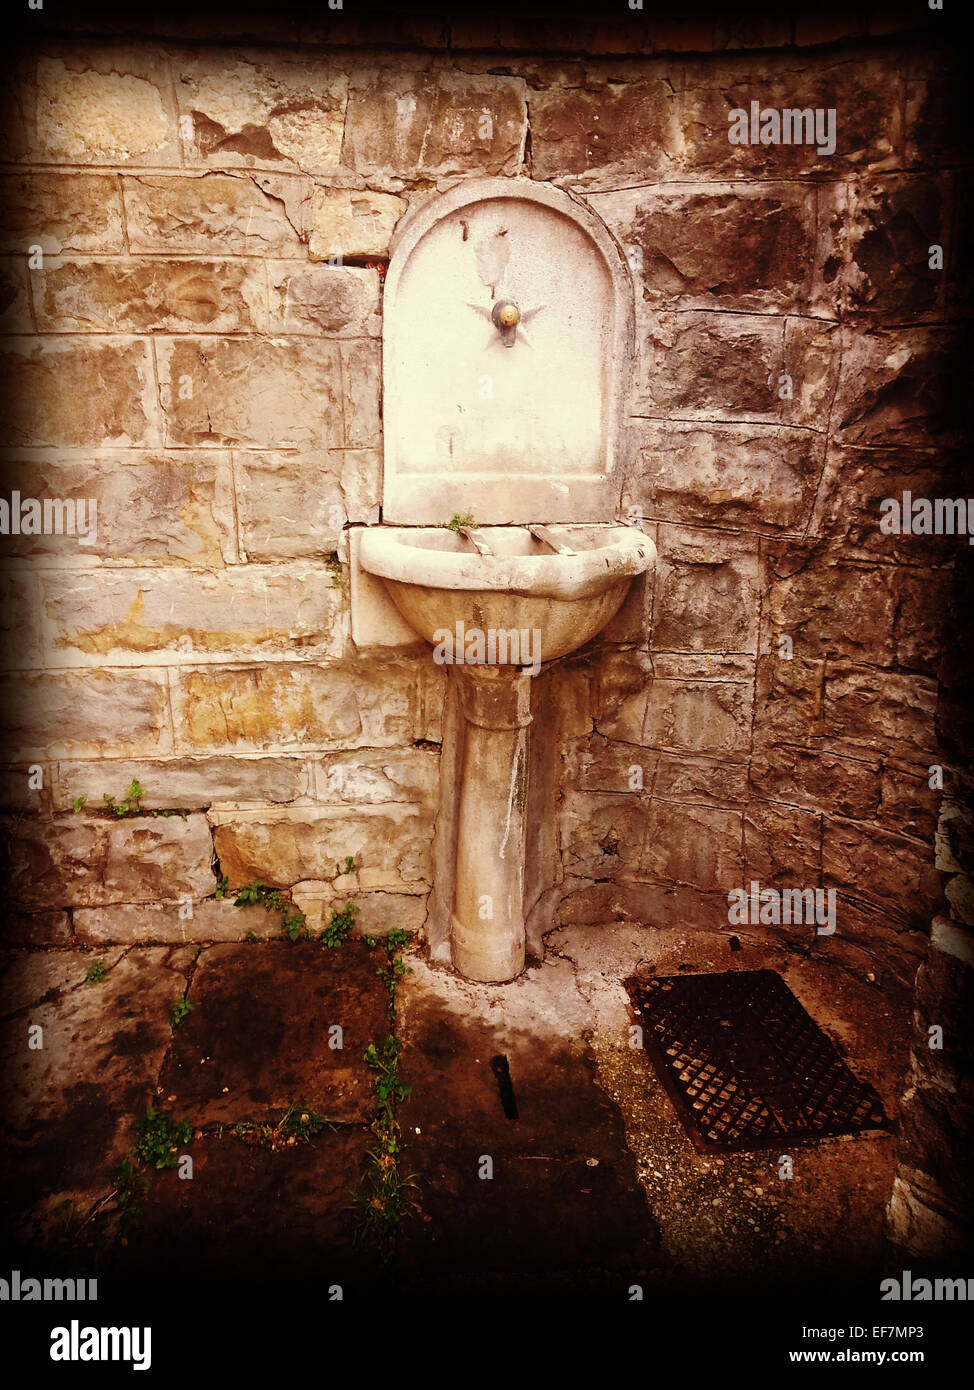 An old public fountain survives in the periphery of Trieste Stock Photo